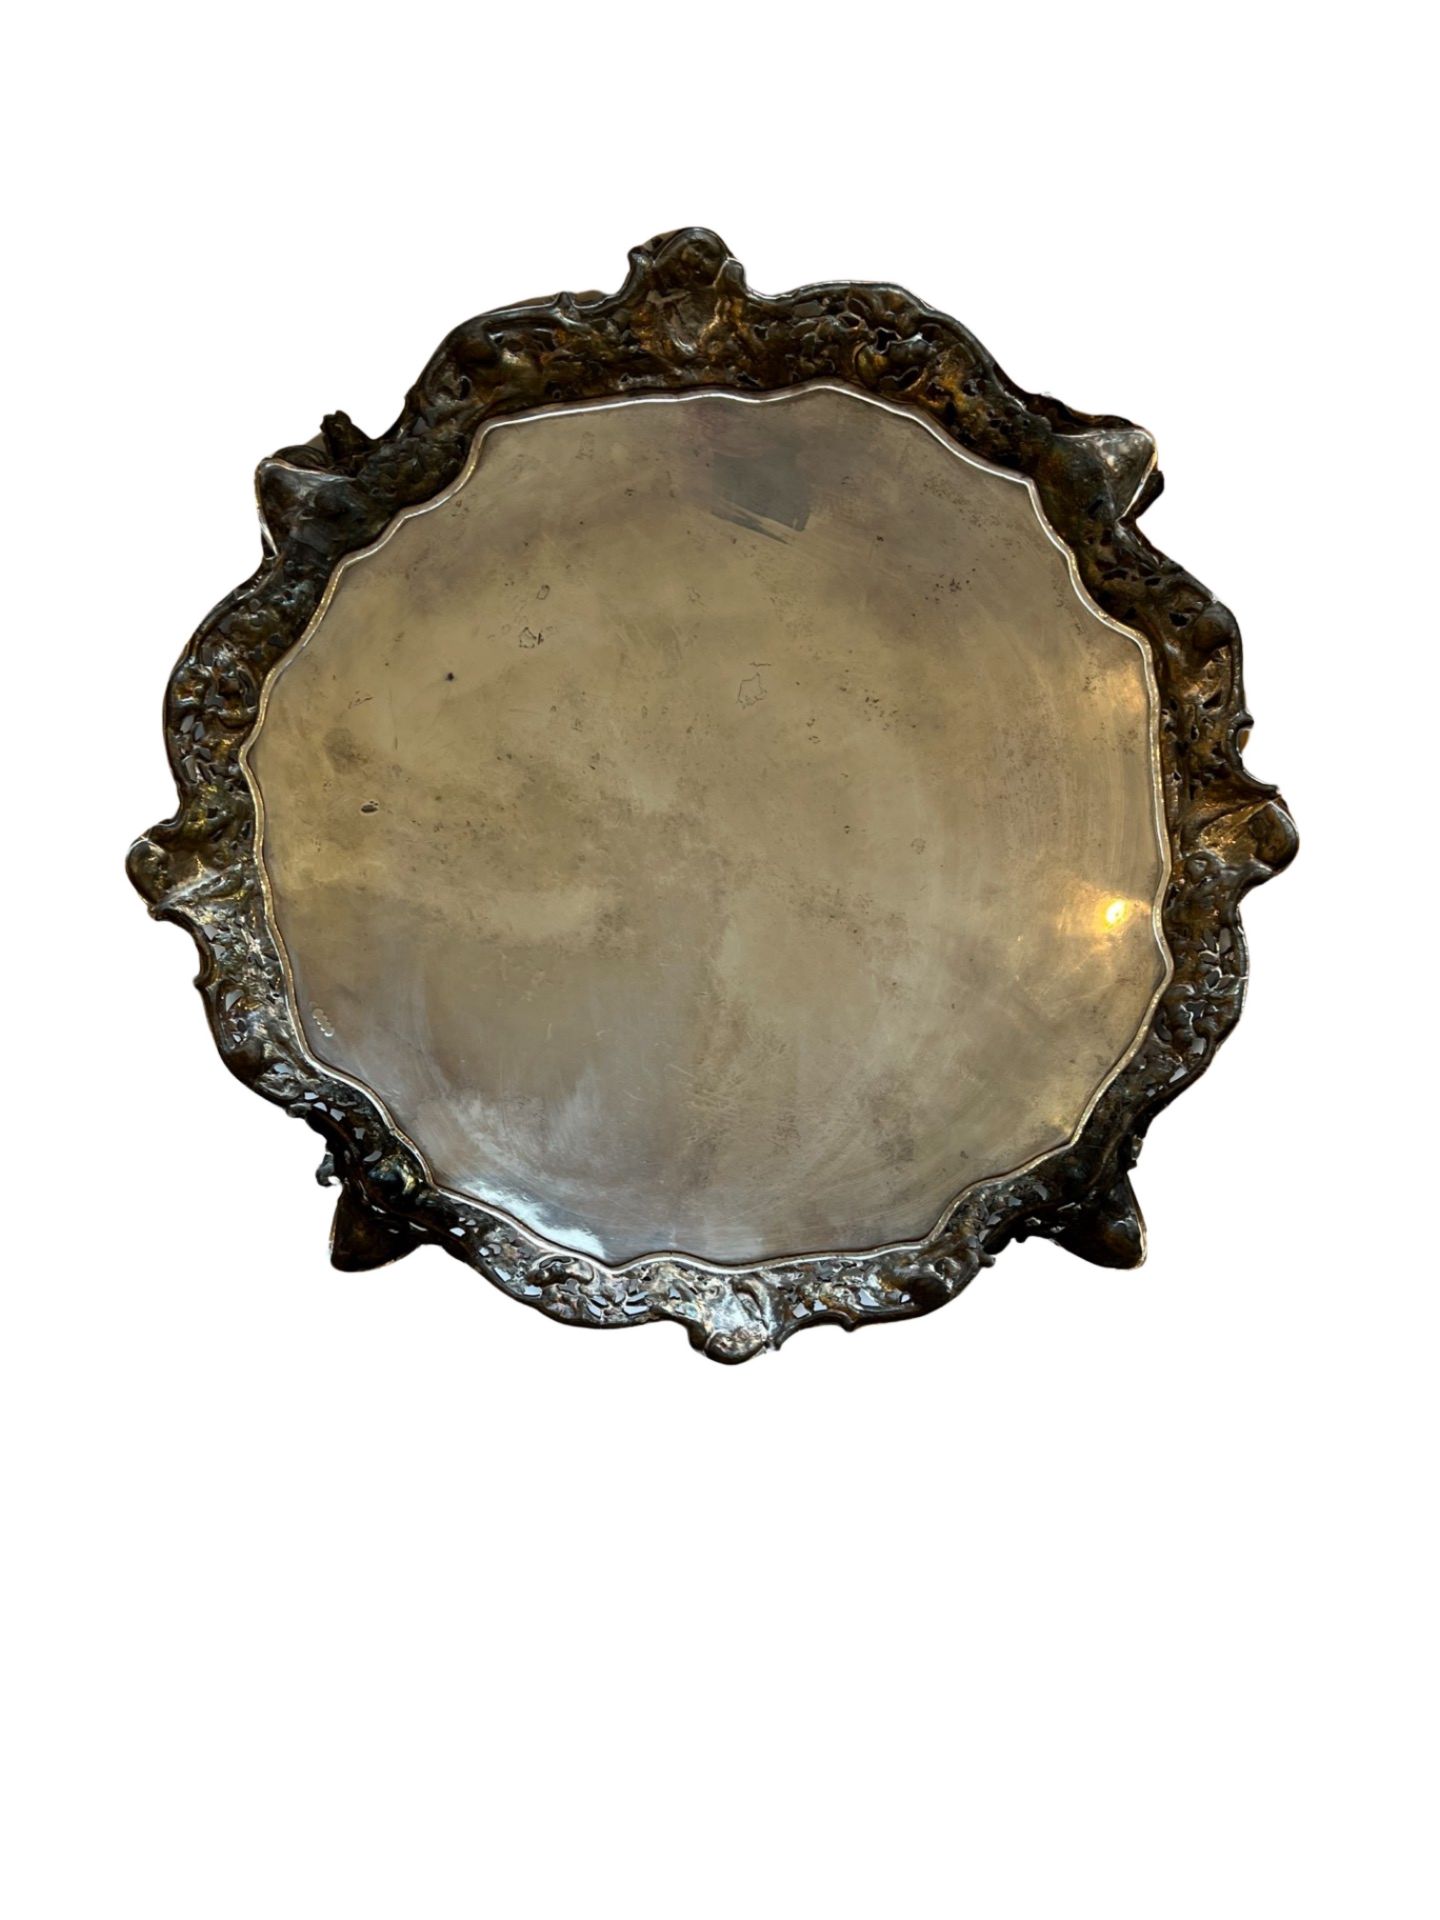 A MASSIVE STERLING SILVER SALVER BY ROBERT W. SMITH OF DUBLIN , 1846 - Image 16 of 21